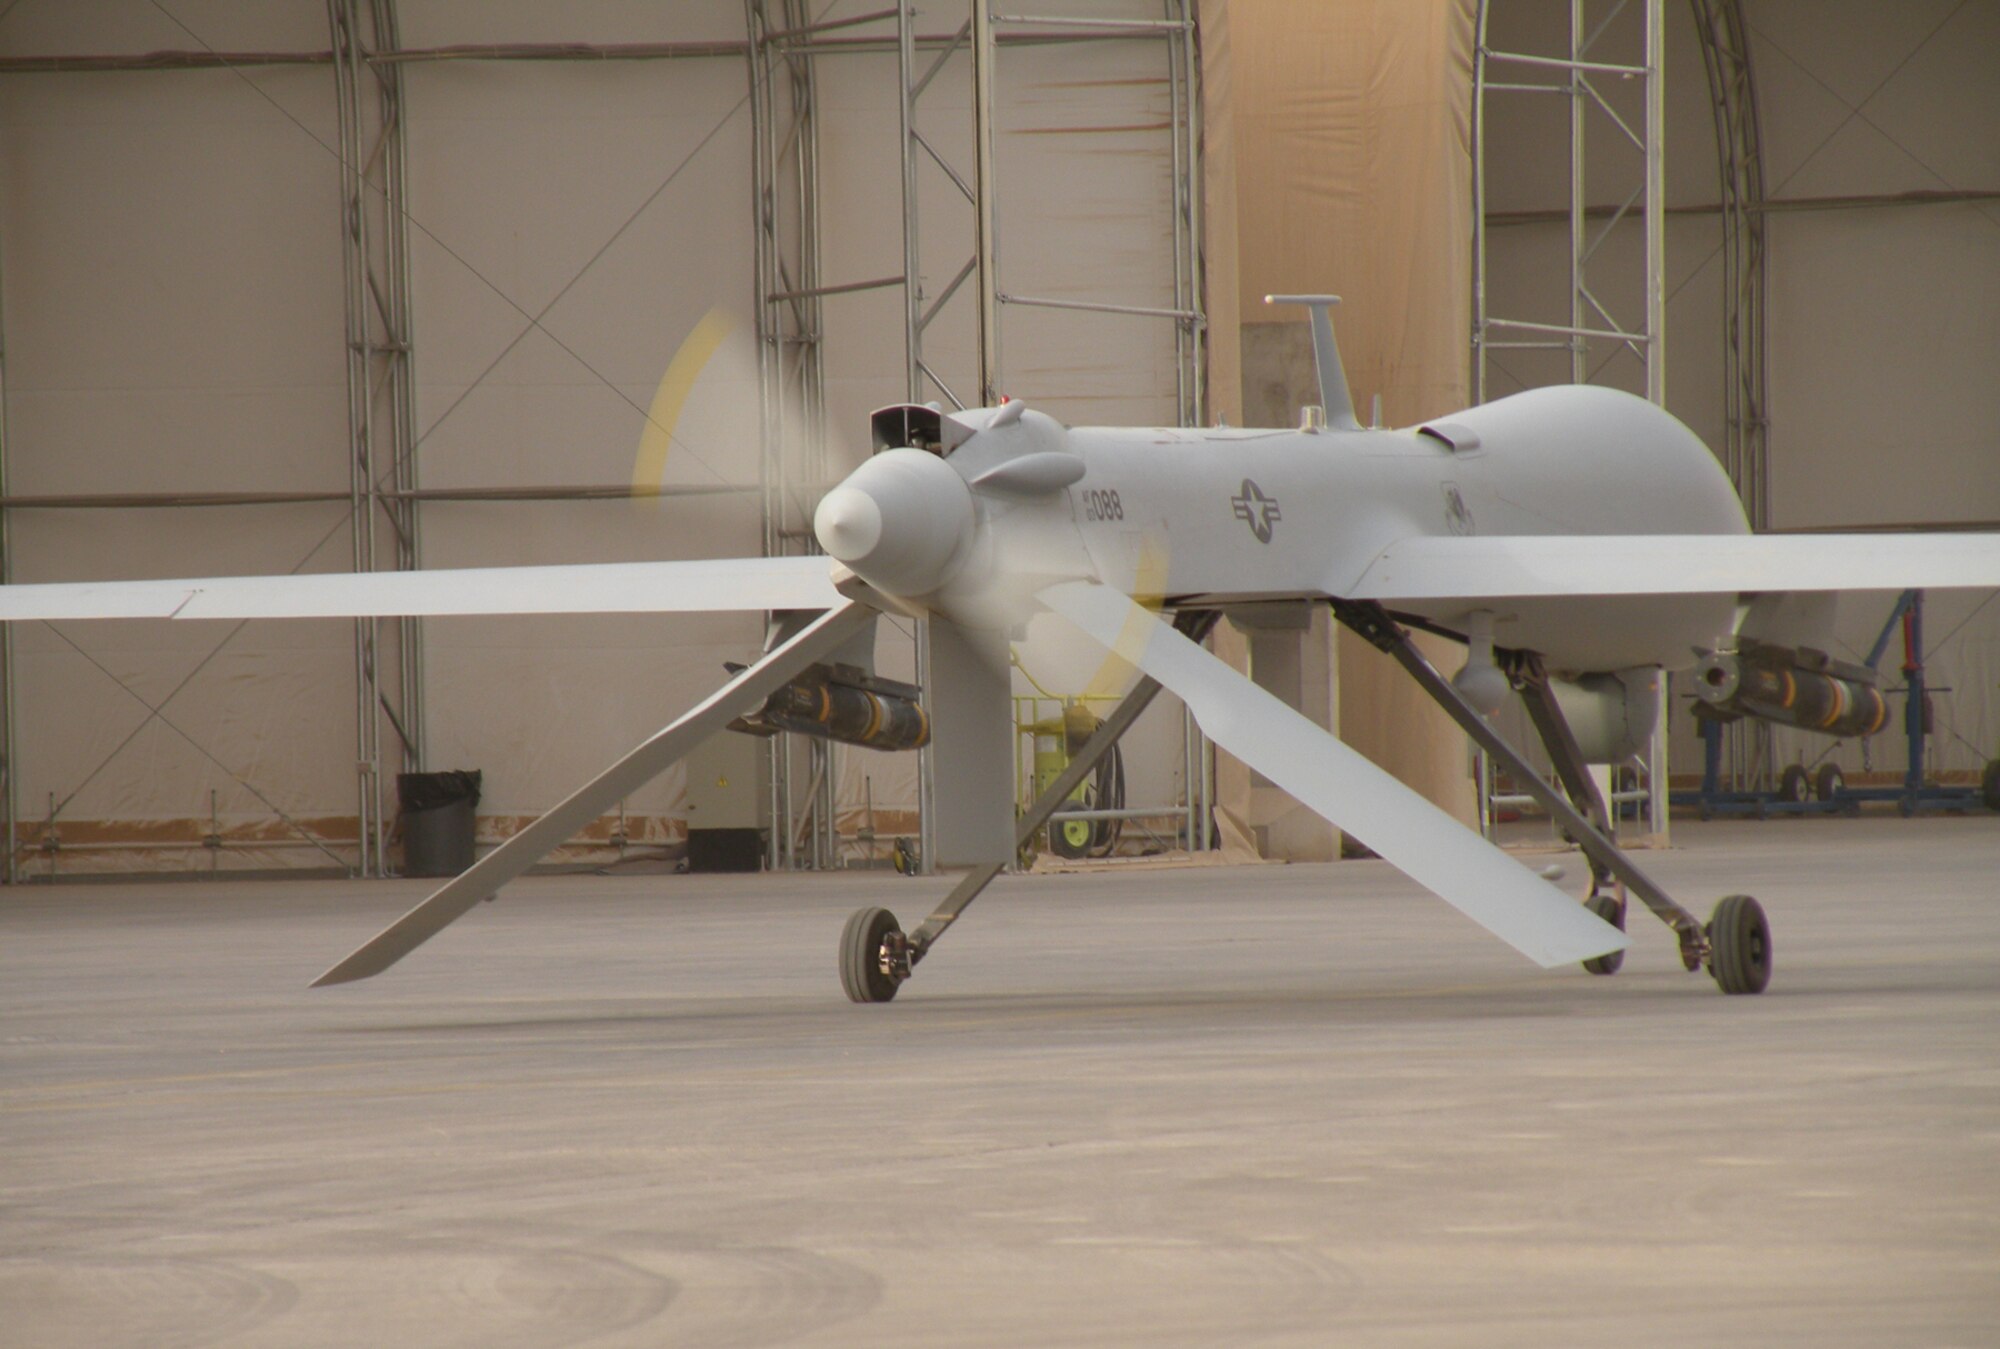 An MQ-1 Predator Unmanned Aircraft System idles at Joint Base Balad, Iraq, after returning from a mission in September, 2008. The Air Force is taking a new approach for developing pilots to sustain the fast-growing need for UAS capabilities. The MQ-1's primary mission is interdiction and conducting armed reconnaissance against critical, perishable targets. (U.S. Air Force photo/Staff Sgt. Scott Gaitley)